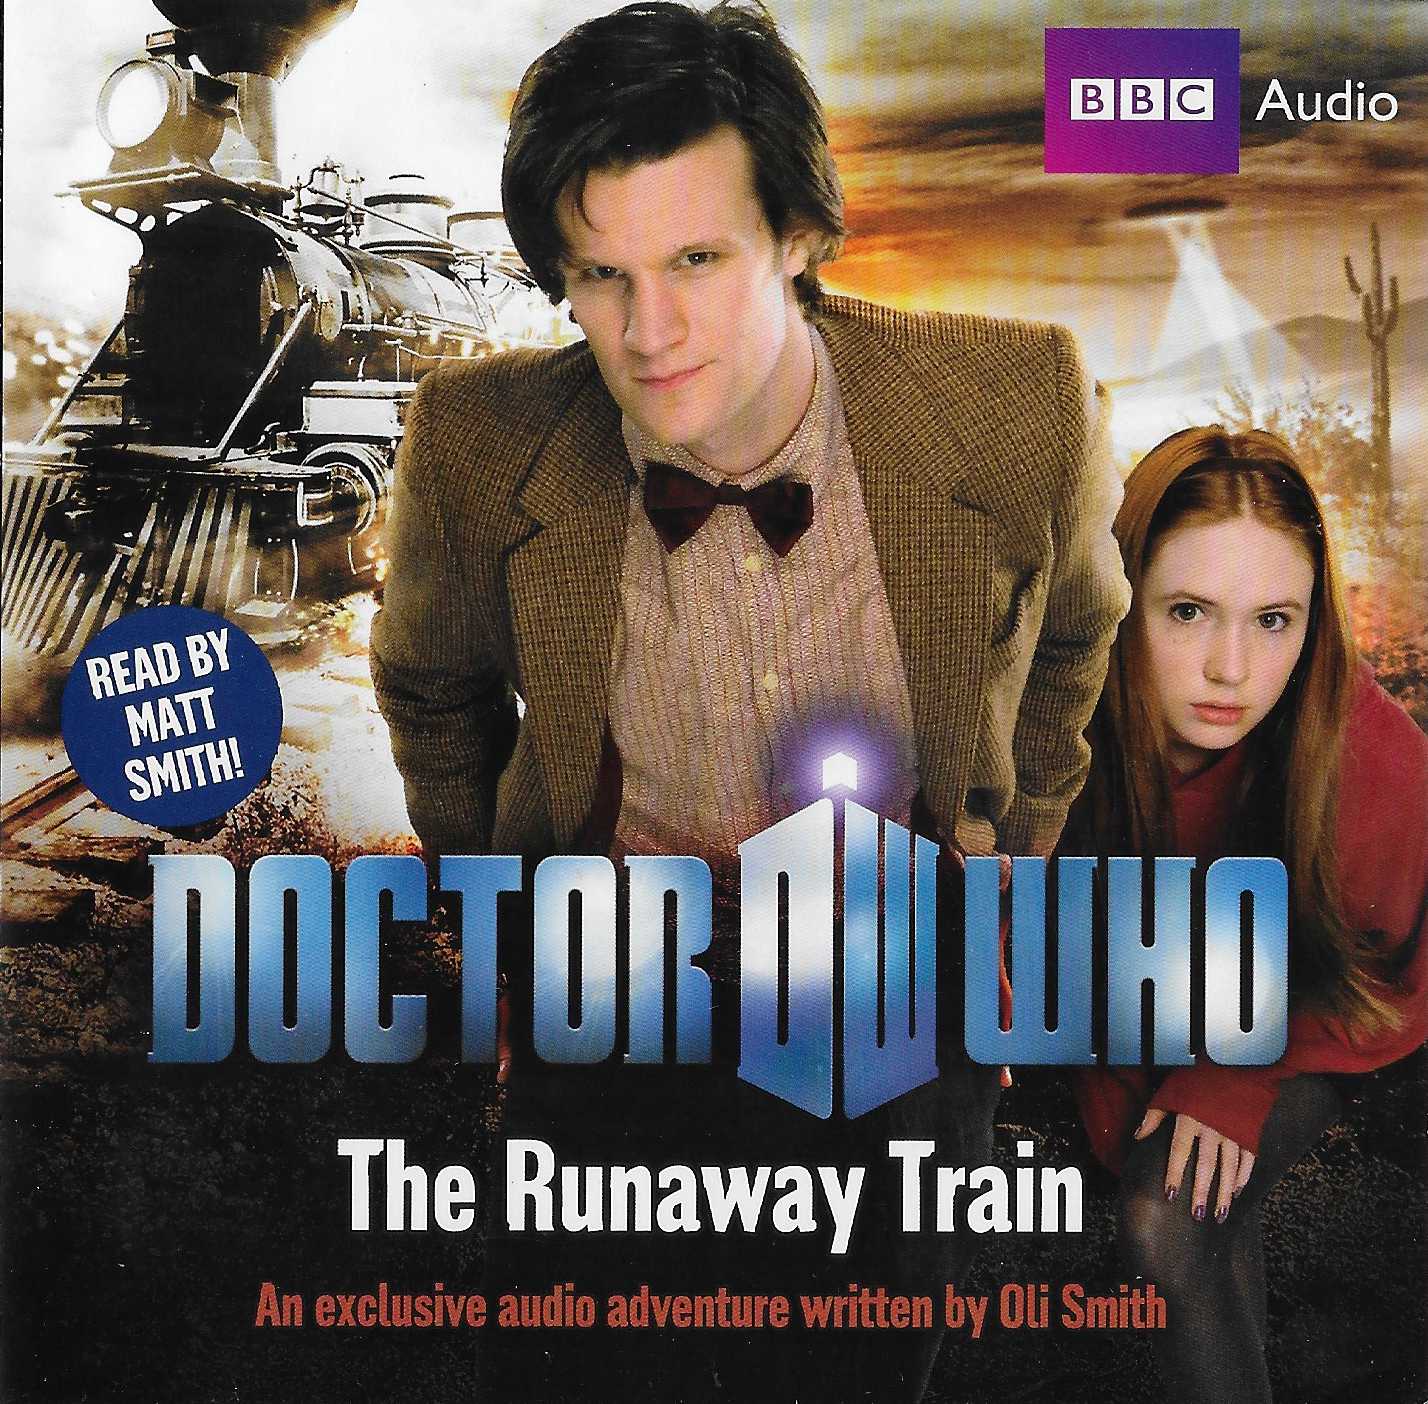 Picture of Doctor Who - The runaway train by artist Oli Smith from the BBC cds - Records and Tapes library